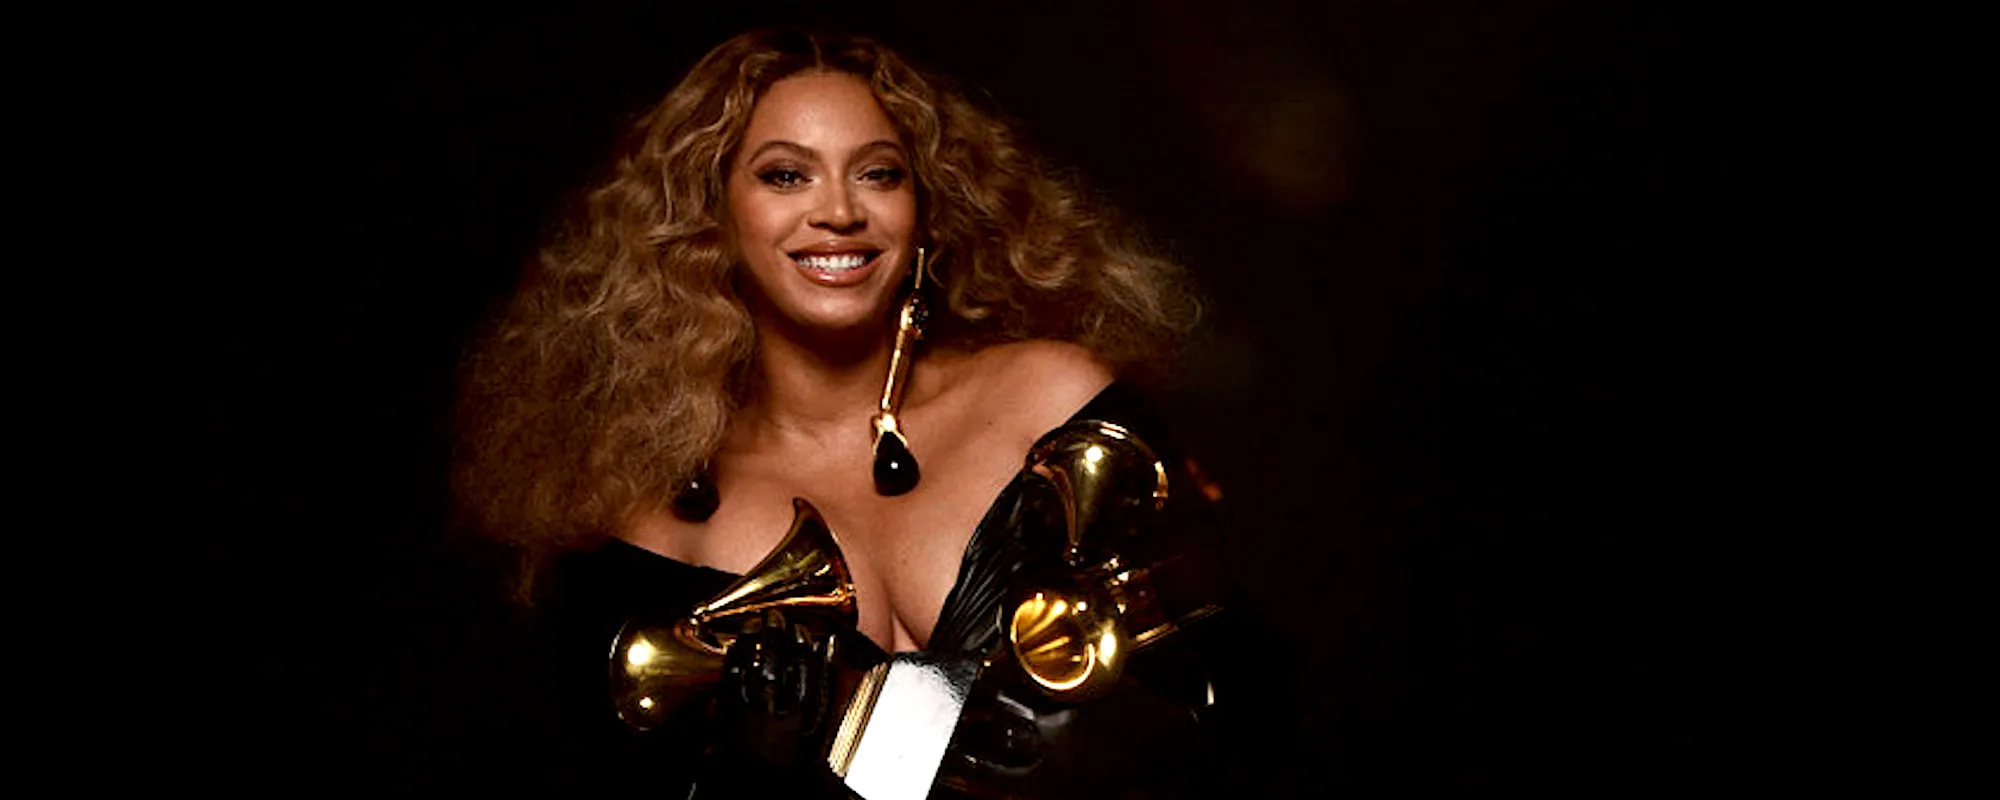 Beyoncé’s “Break My Soul” is Her First Solo No. 1 Hit in 14 Years